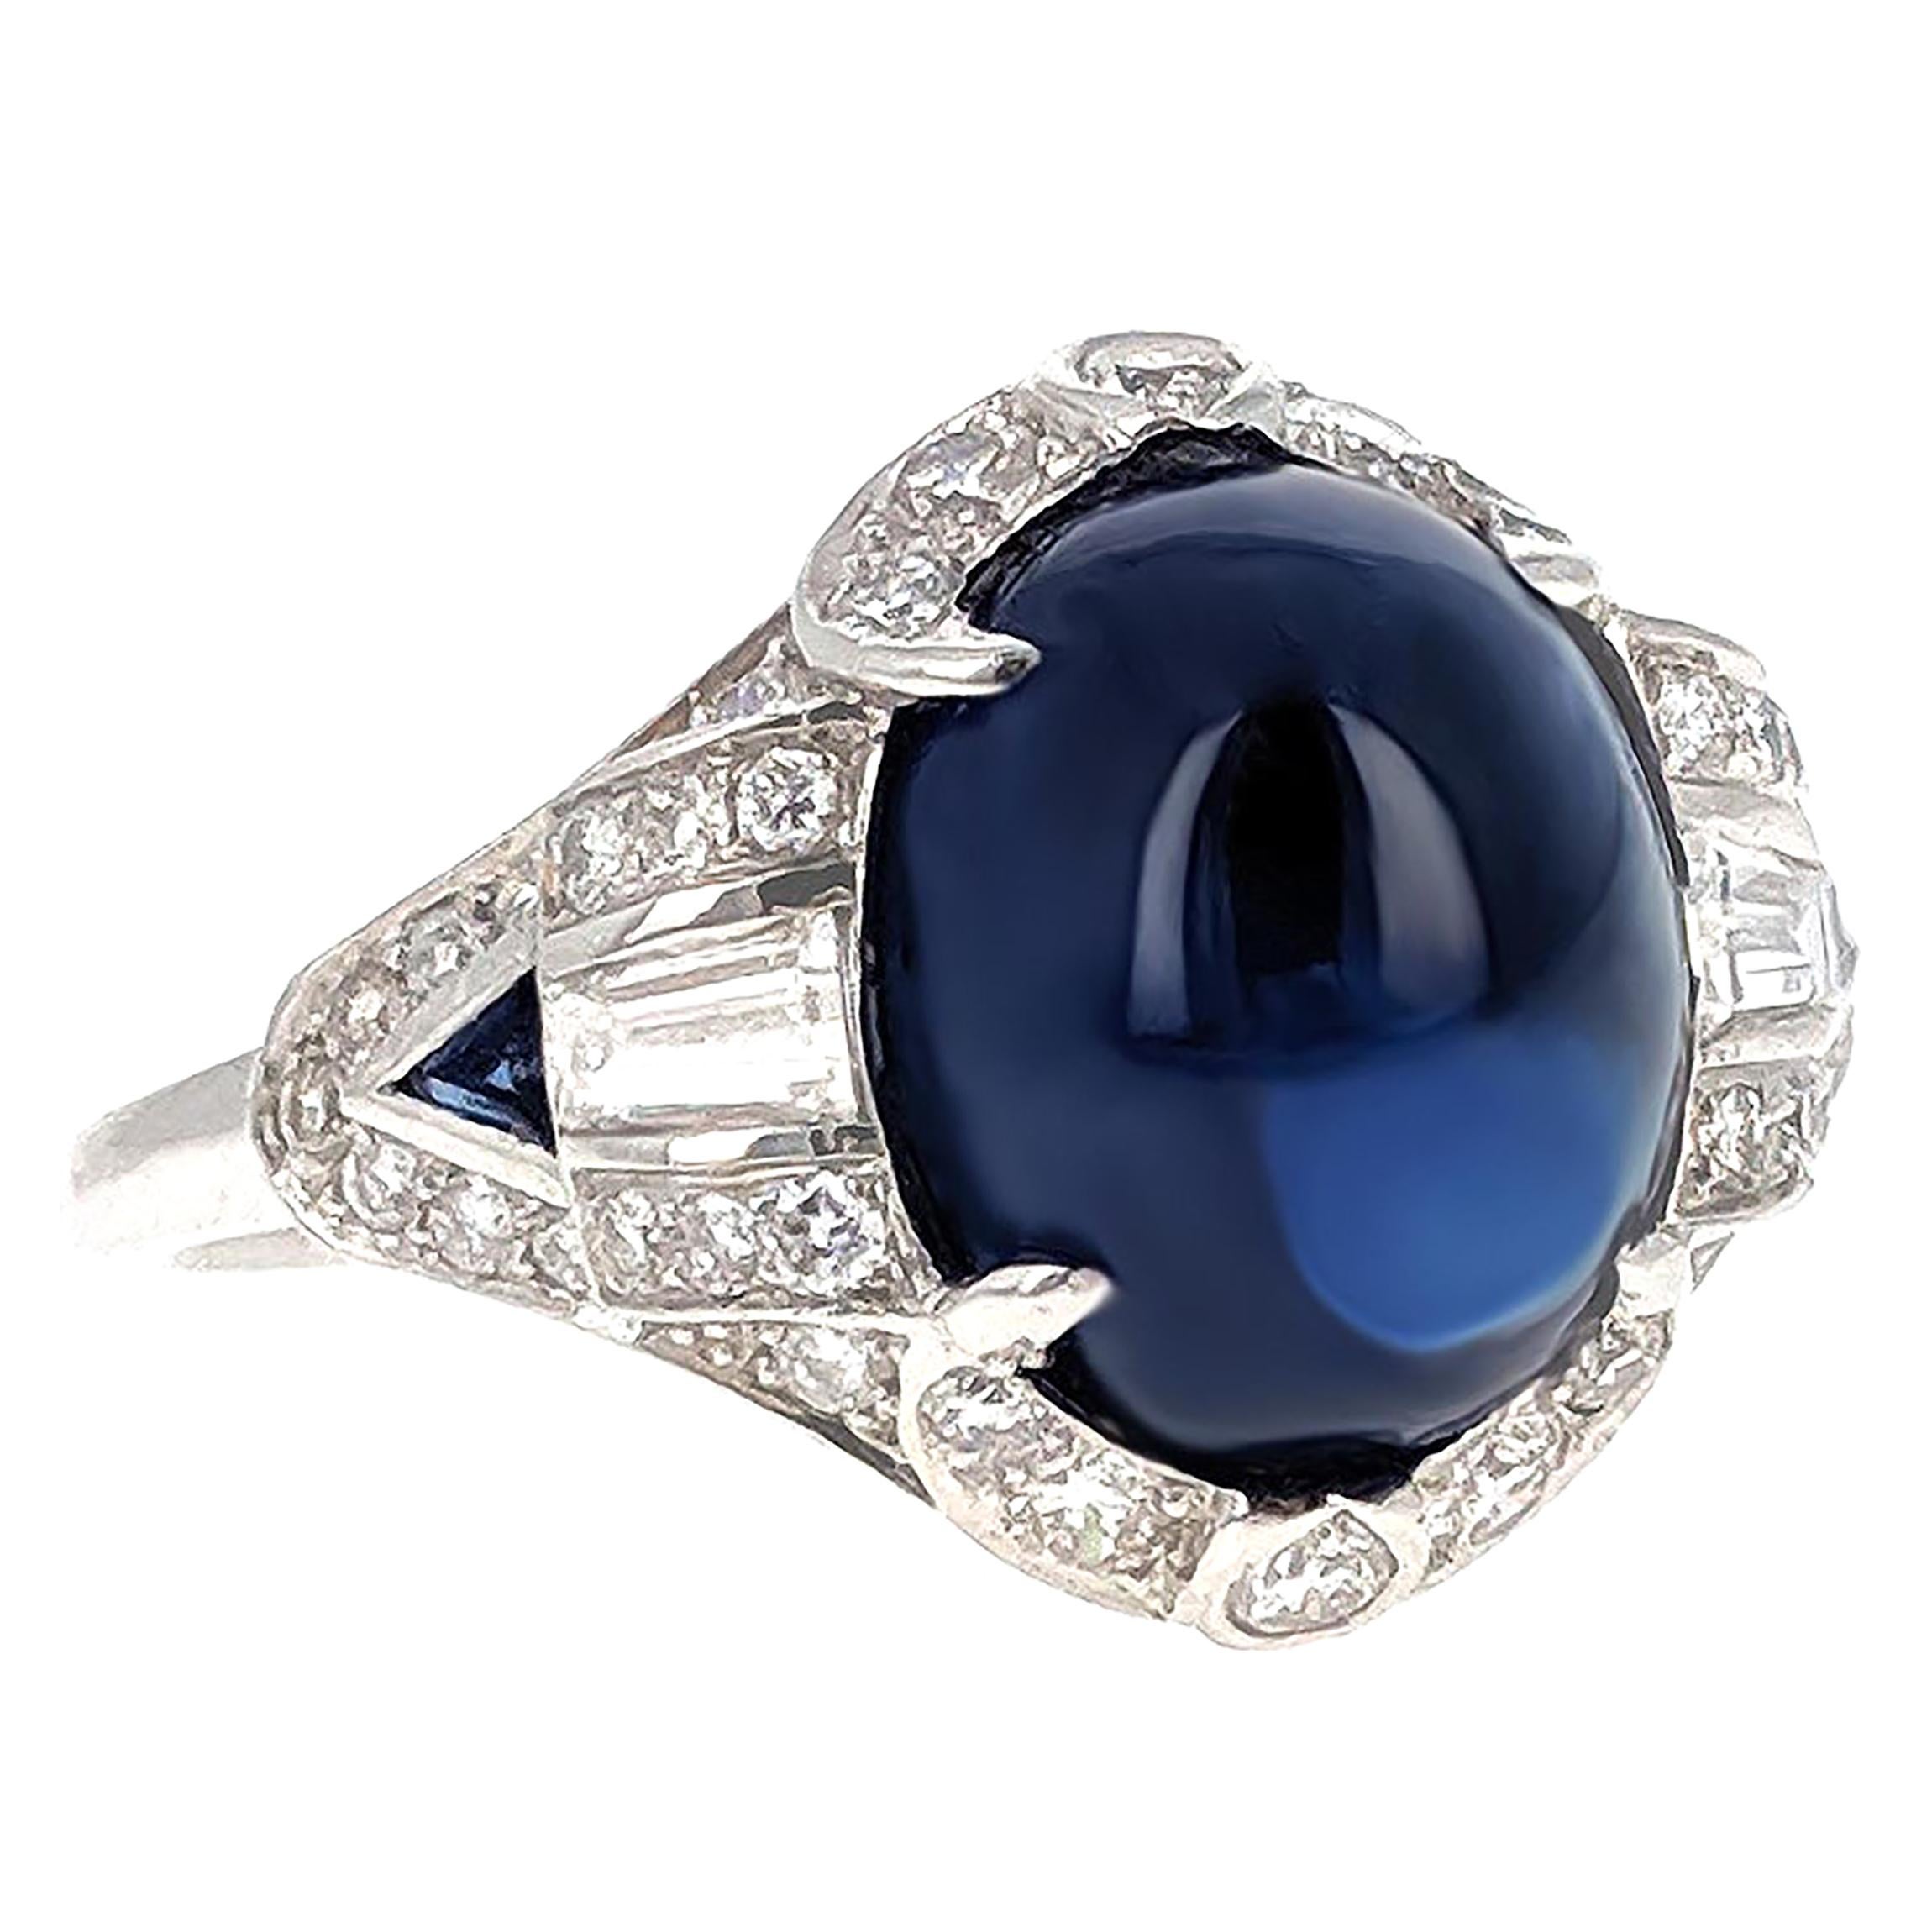 This ring centers upon a cabochon sapphire weighing approximately 6.20 carats. It is  framed by round diamonds, accented by baguette diamonds, and further set with two triangle-shaped sapphires. It is mounted in platinum and created circa 1930.

The